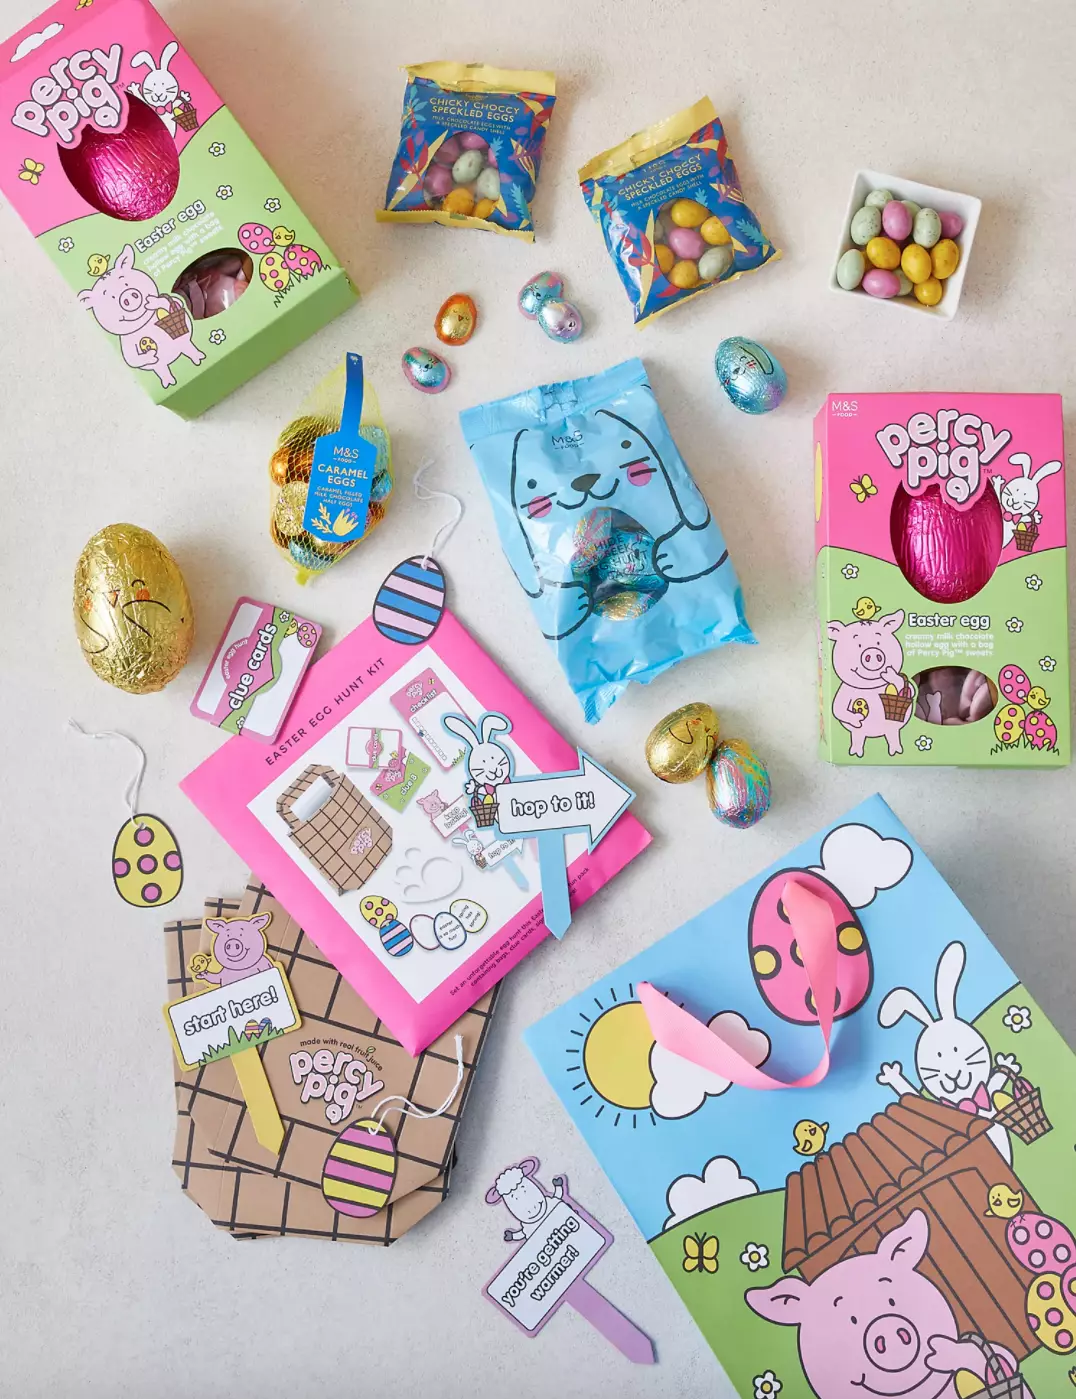 The Easter egg hunt kit comes with all the goodies you need (